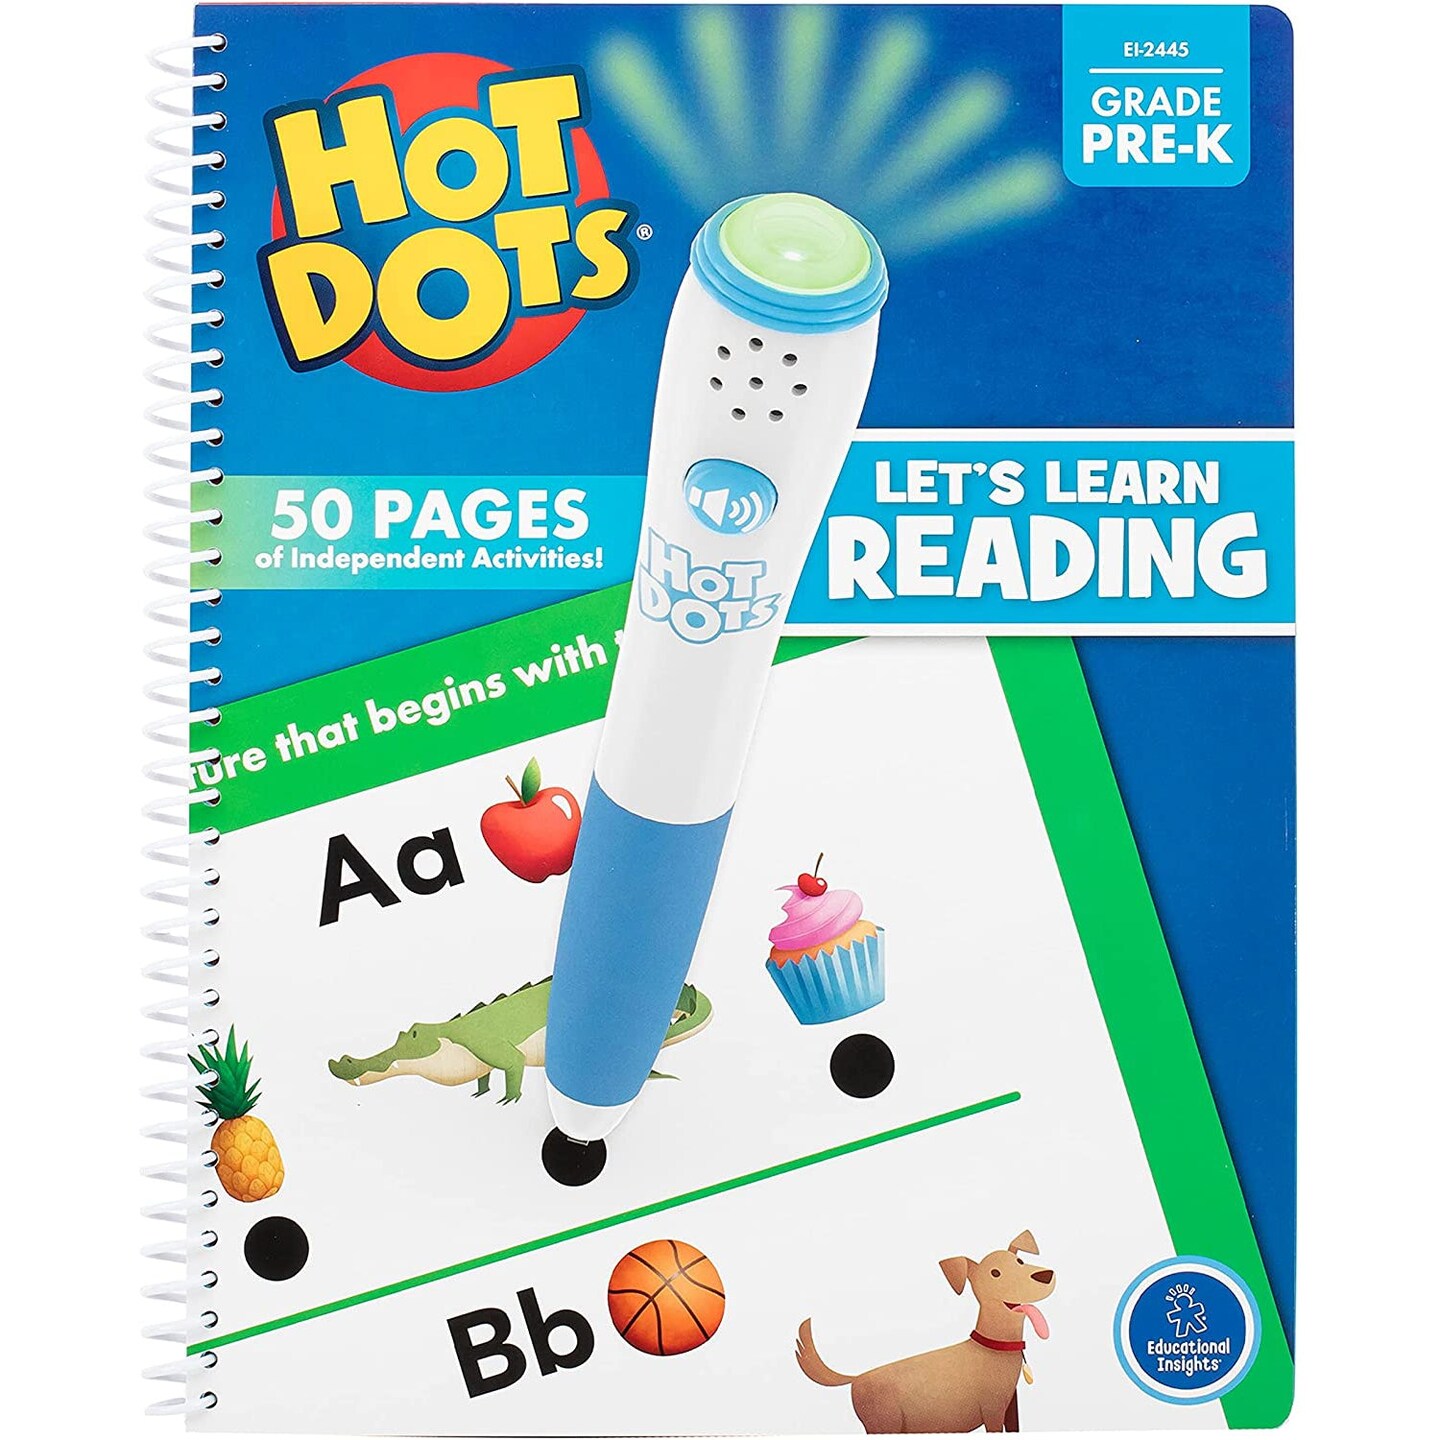 Hot Dots&#xAE; Let&#x27;s Learn Pre-K Reading!